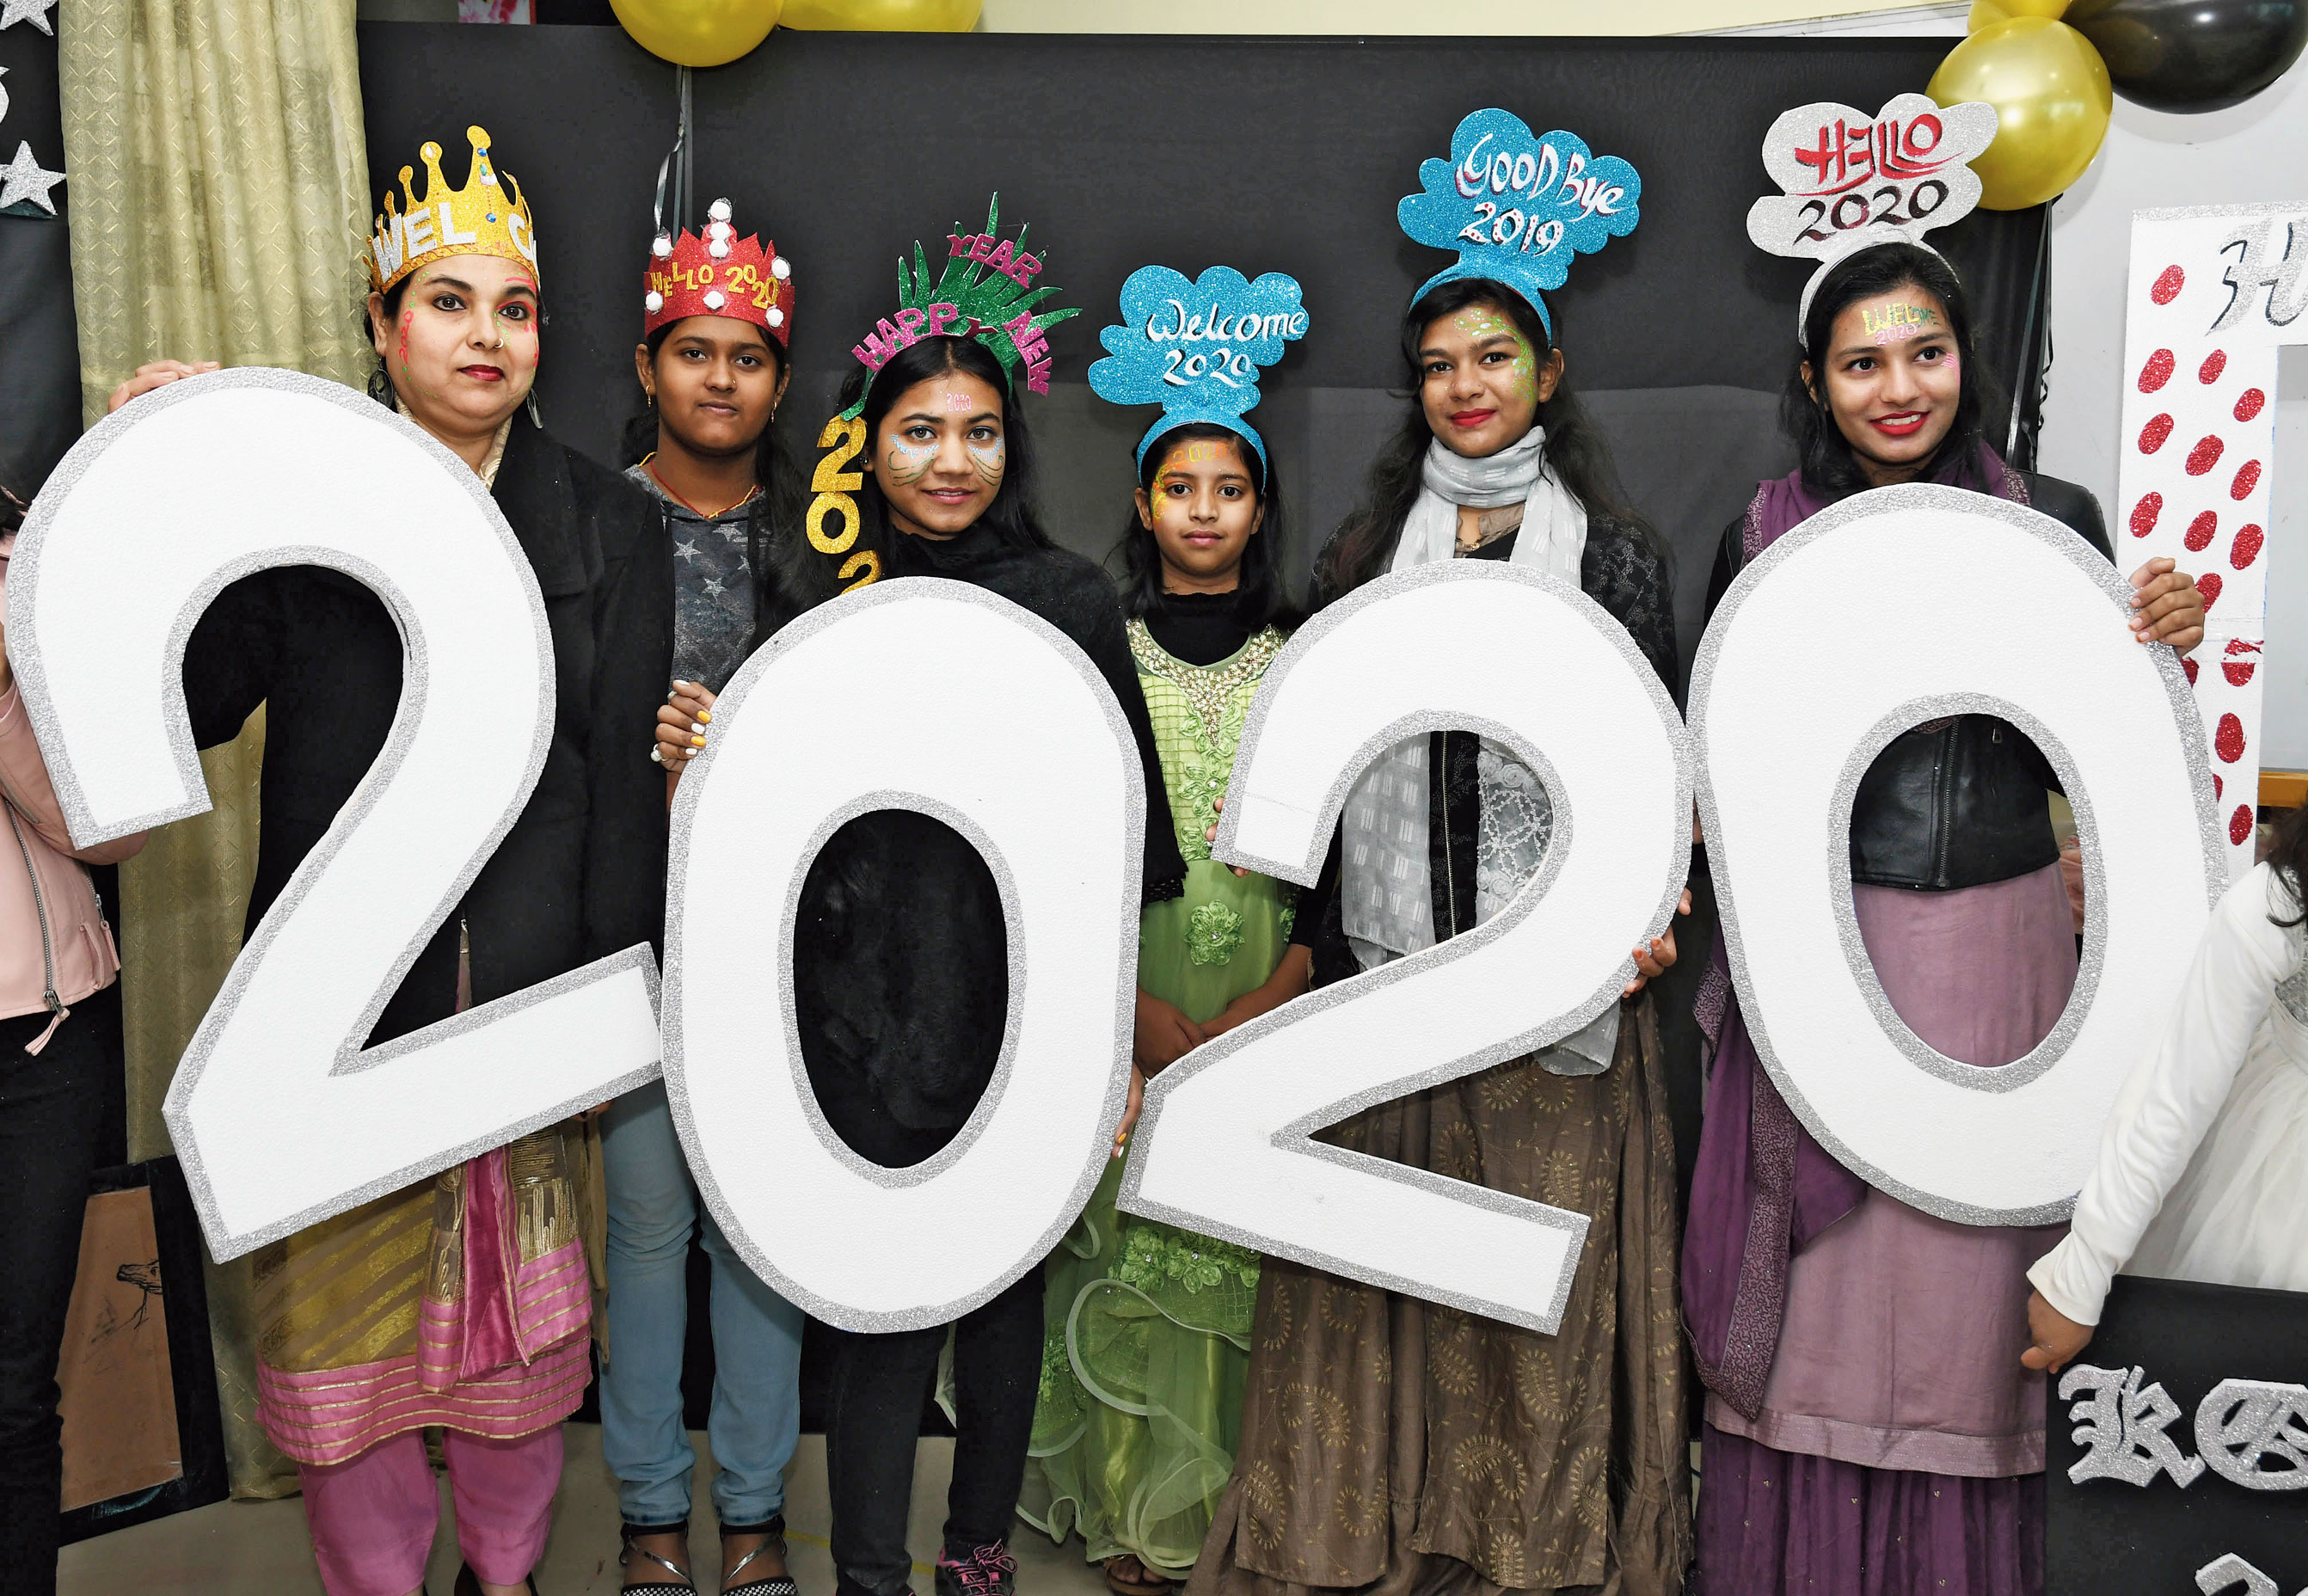 I-FA International School of Art and Design students welcome New Year 2020 on their campus in Ranchi.